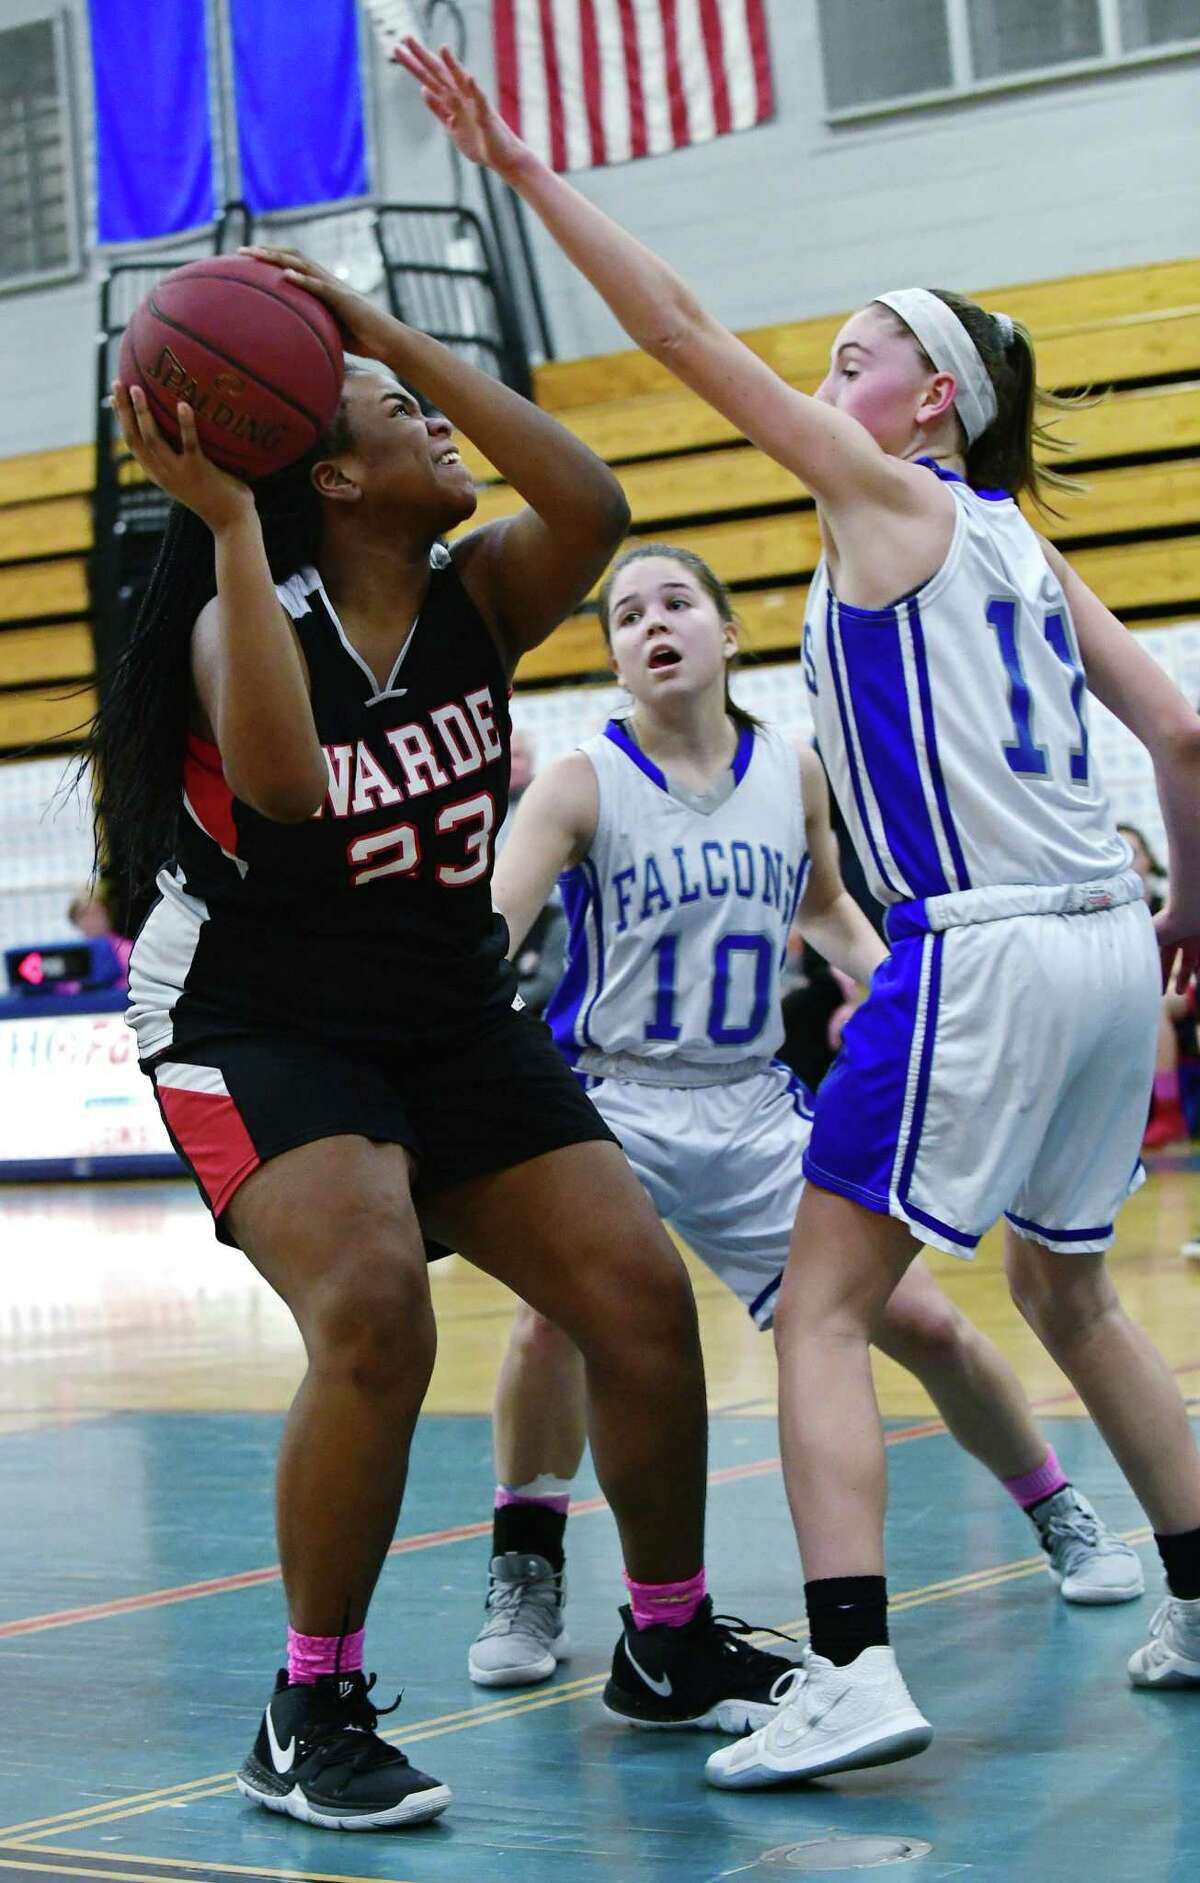 Mustang #33 Aleysha Henry goes up against Falcons #10 Juliet Bucher and #13Anna Paulmann as Fairfield Warde High School Mustangs takes on Fairfield Ludlowe High School Falcons during the FCIAC intra-city girls basketball game Wednesday, February 13, 2019, in Fairfiled, Conn.